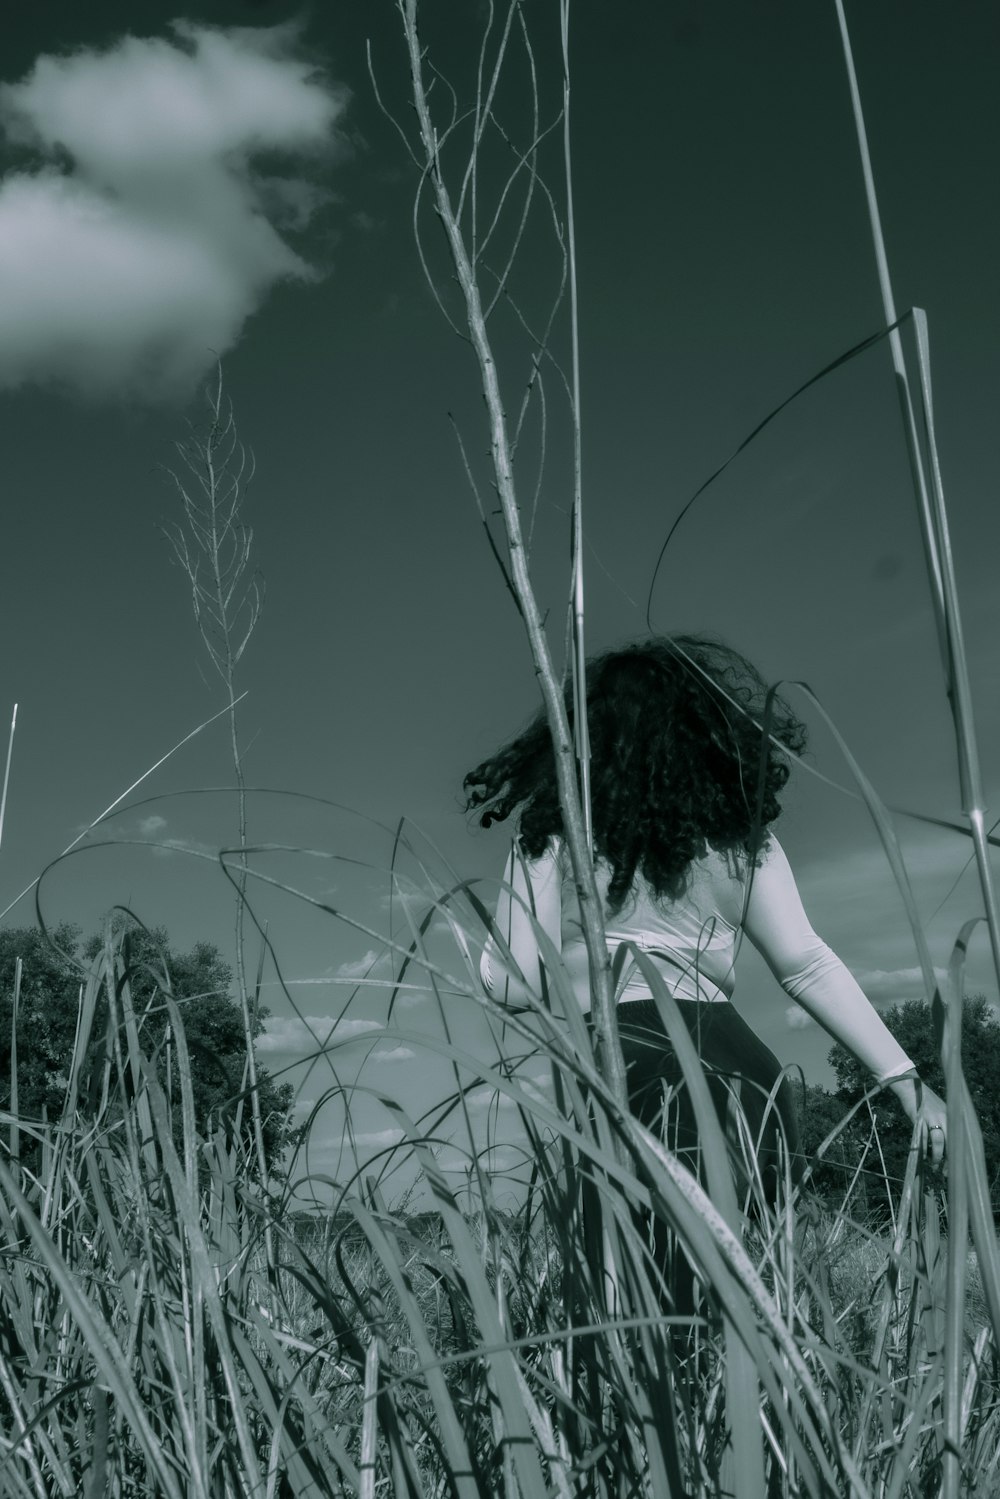 a woman standing in a field of tall grass